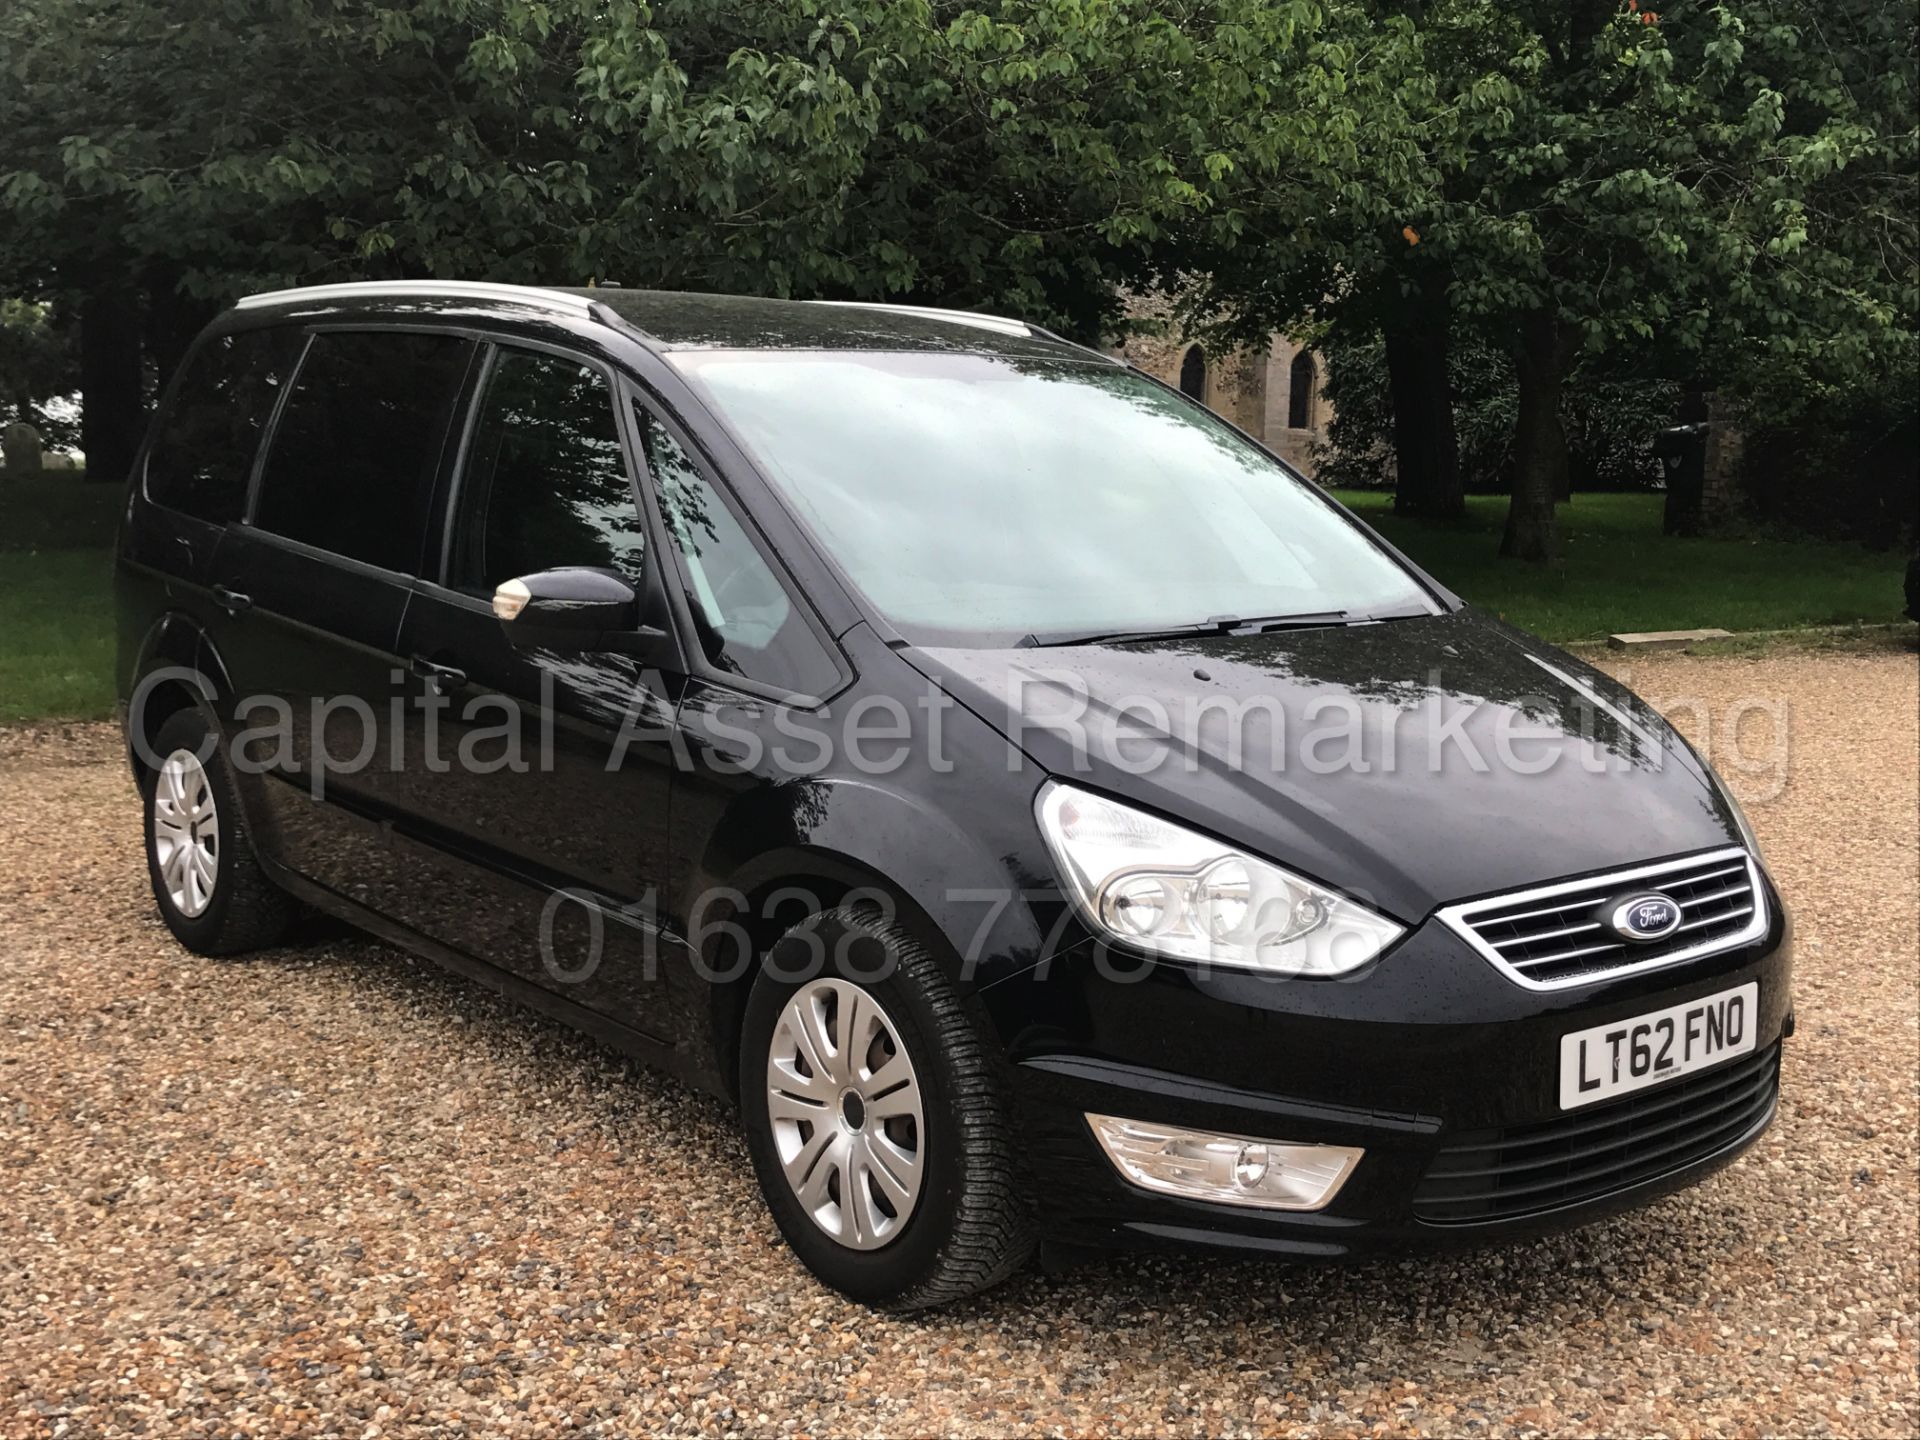 (On Sale) FORD GALAXY 'ZETEC' 7 SEATER MPV (2013 MODEL) '2.0 TDCI - 140 BHP - POWER SHIFT' - Image 3 of 27